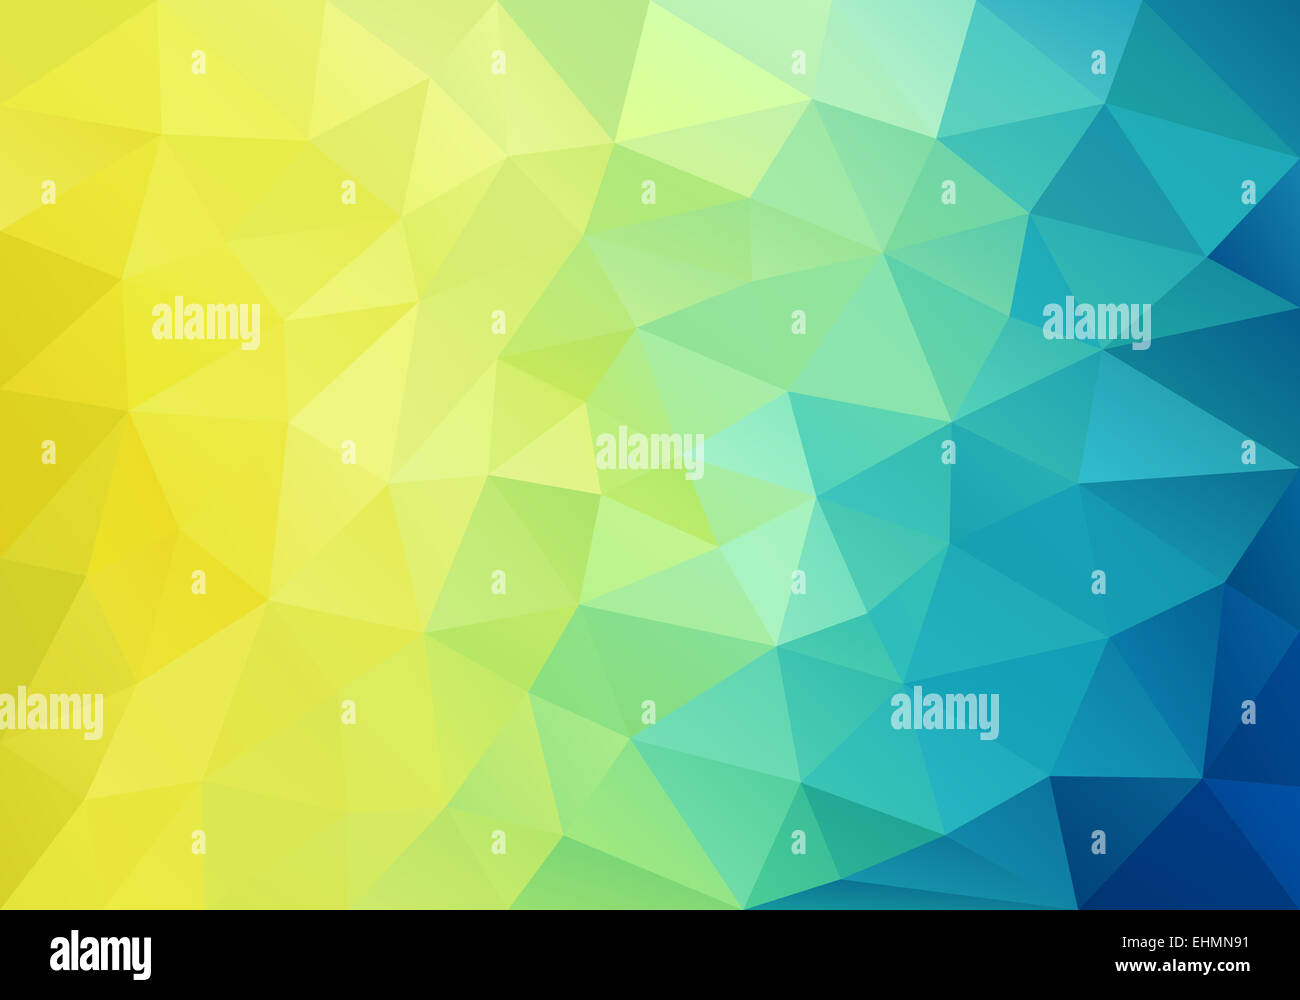 abstract yellow, blue and green low poly background, vector design element Stock Photo